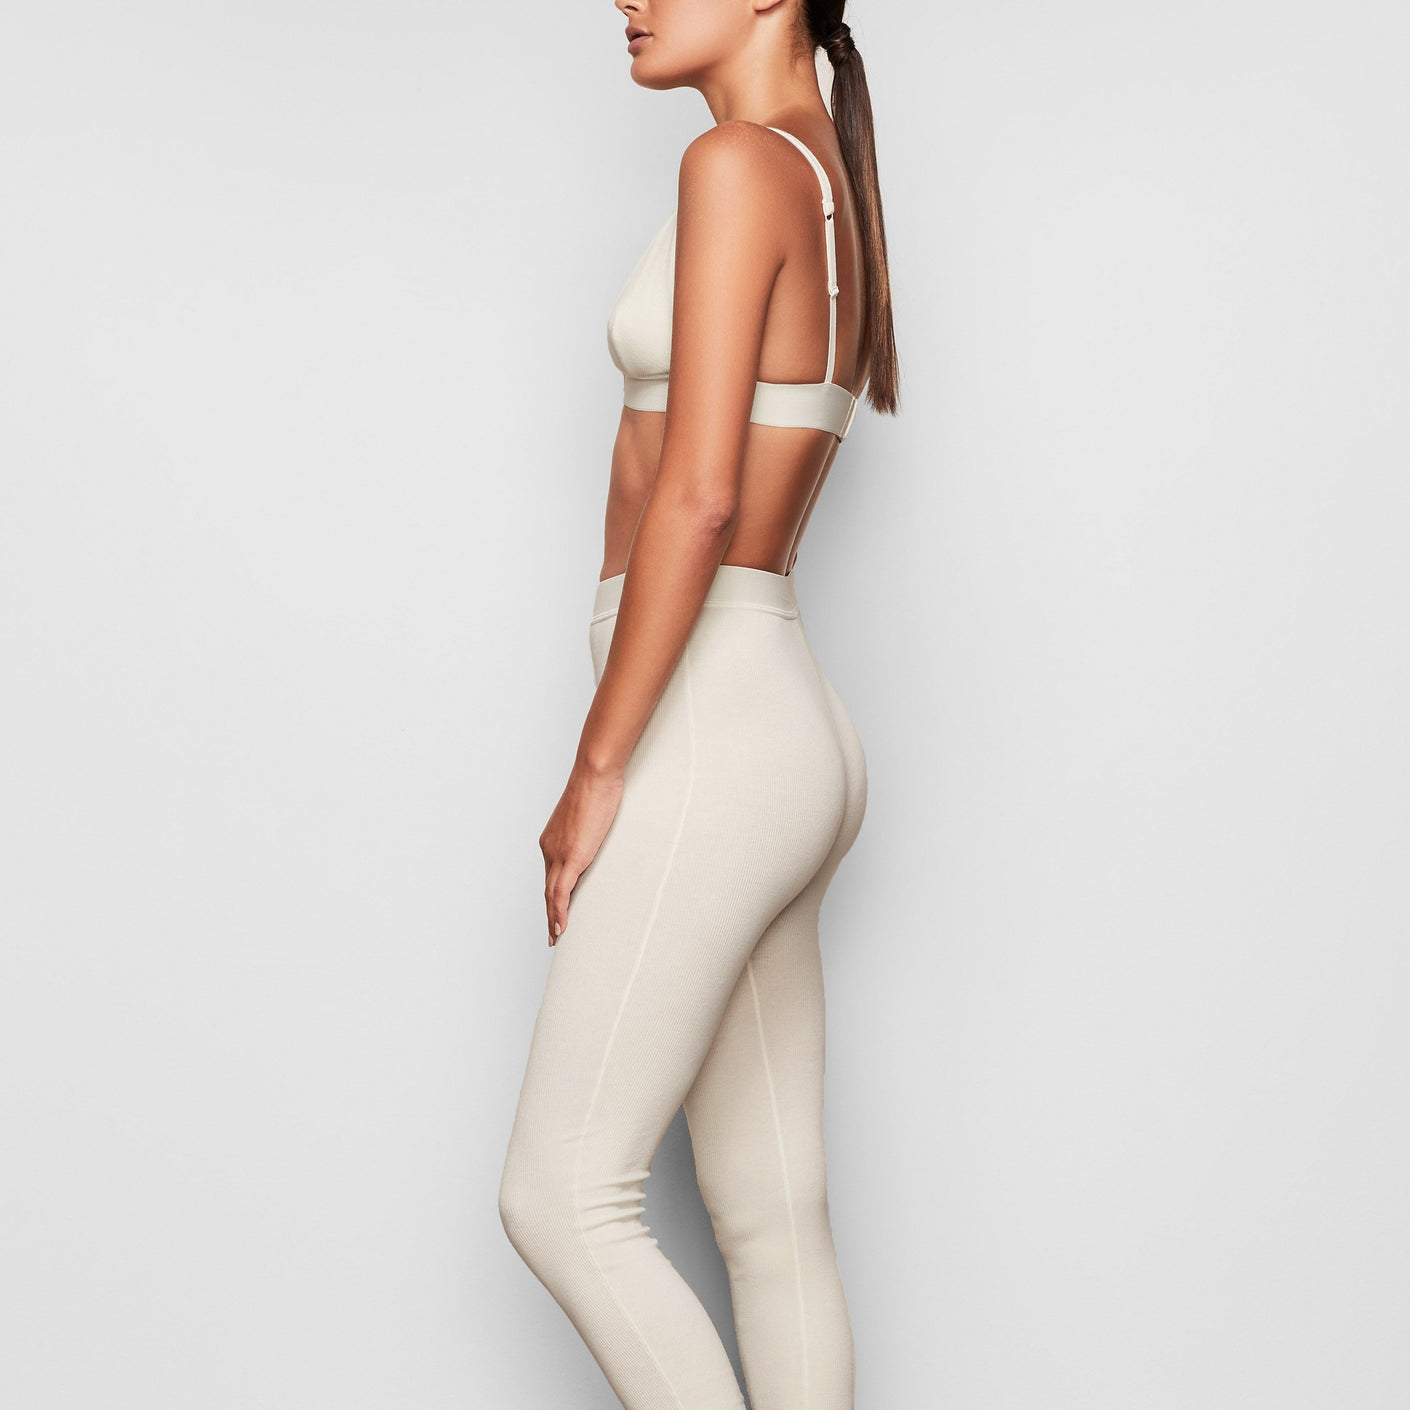 SKIMS Cotton Ribbed Legging Size XS - $30 (44% Off Retail) - From Mia